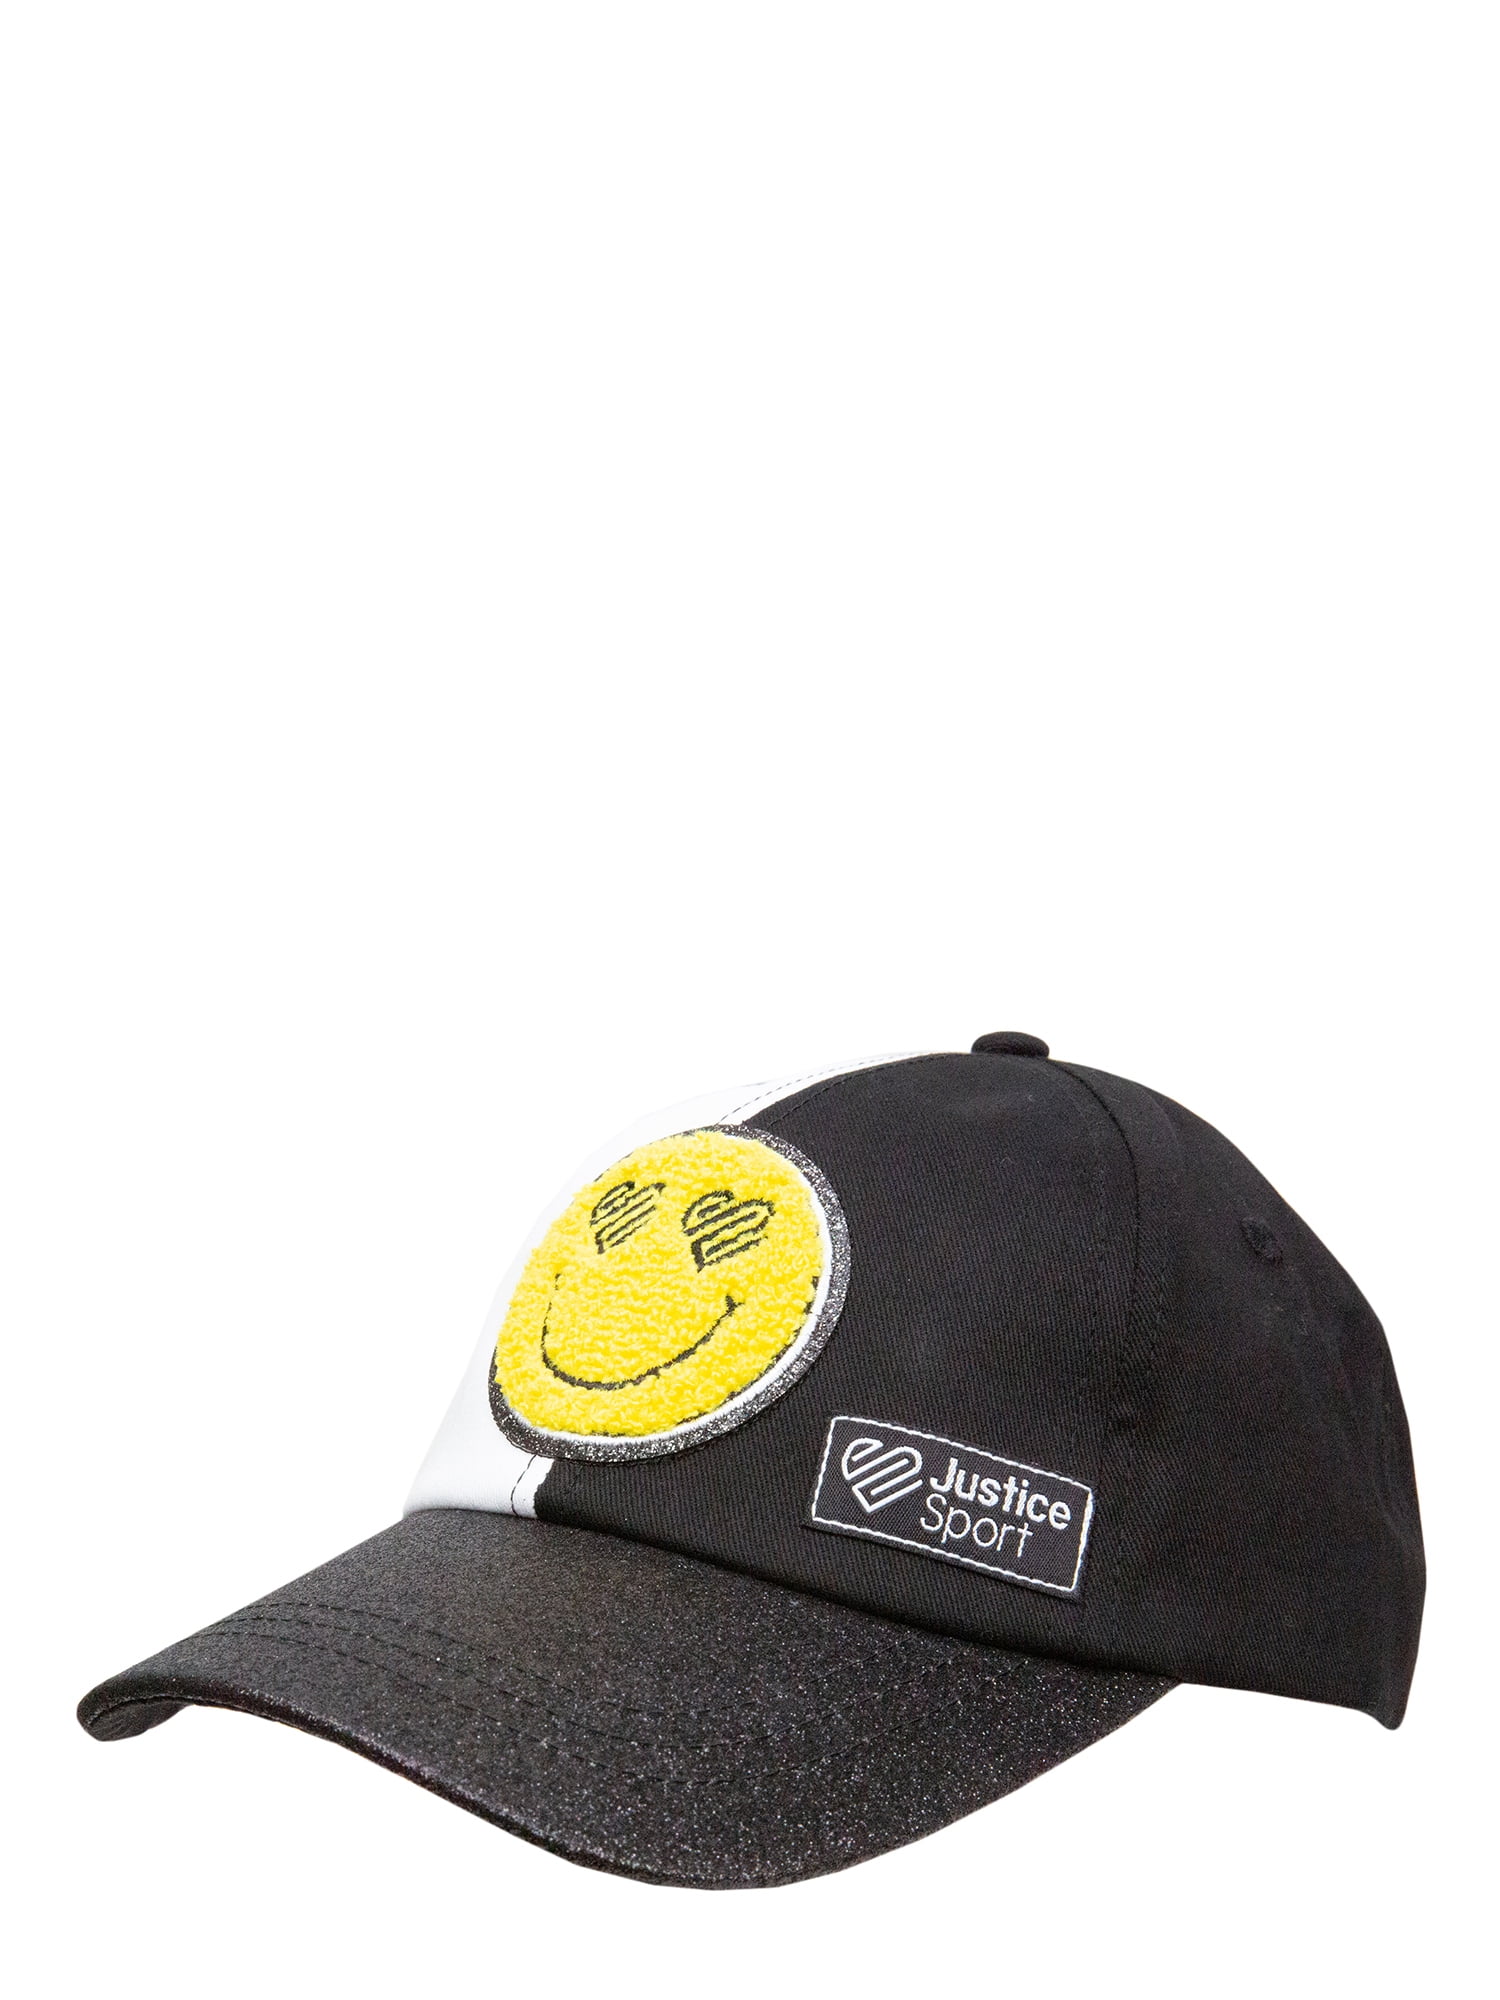 Justice Girls Black and White Smiley Face Baseball Style Hat